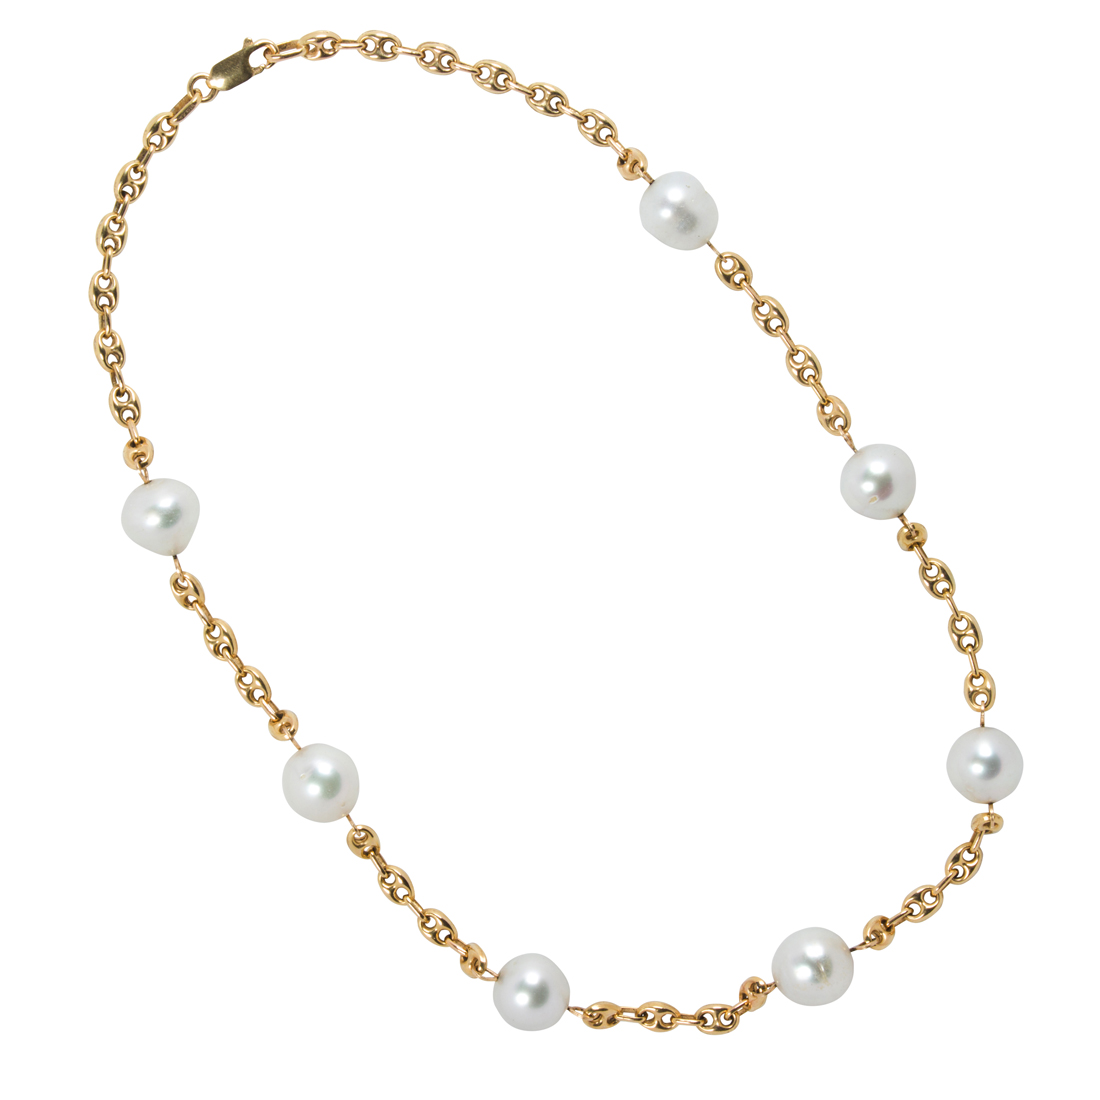 A SOUTH SEA CULTURED PEARL AND 3ce260